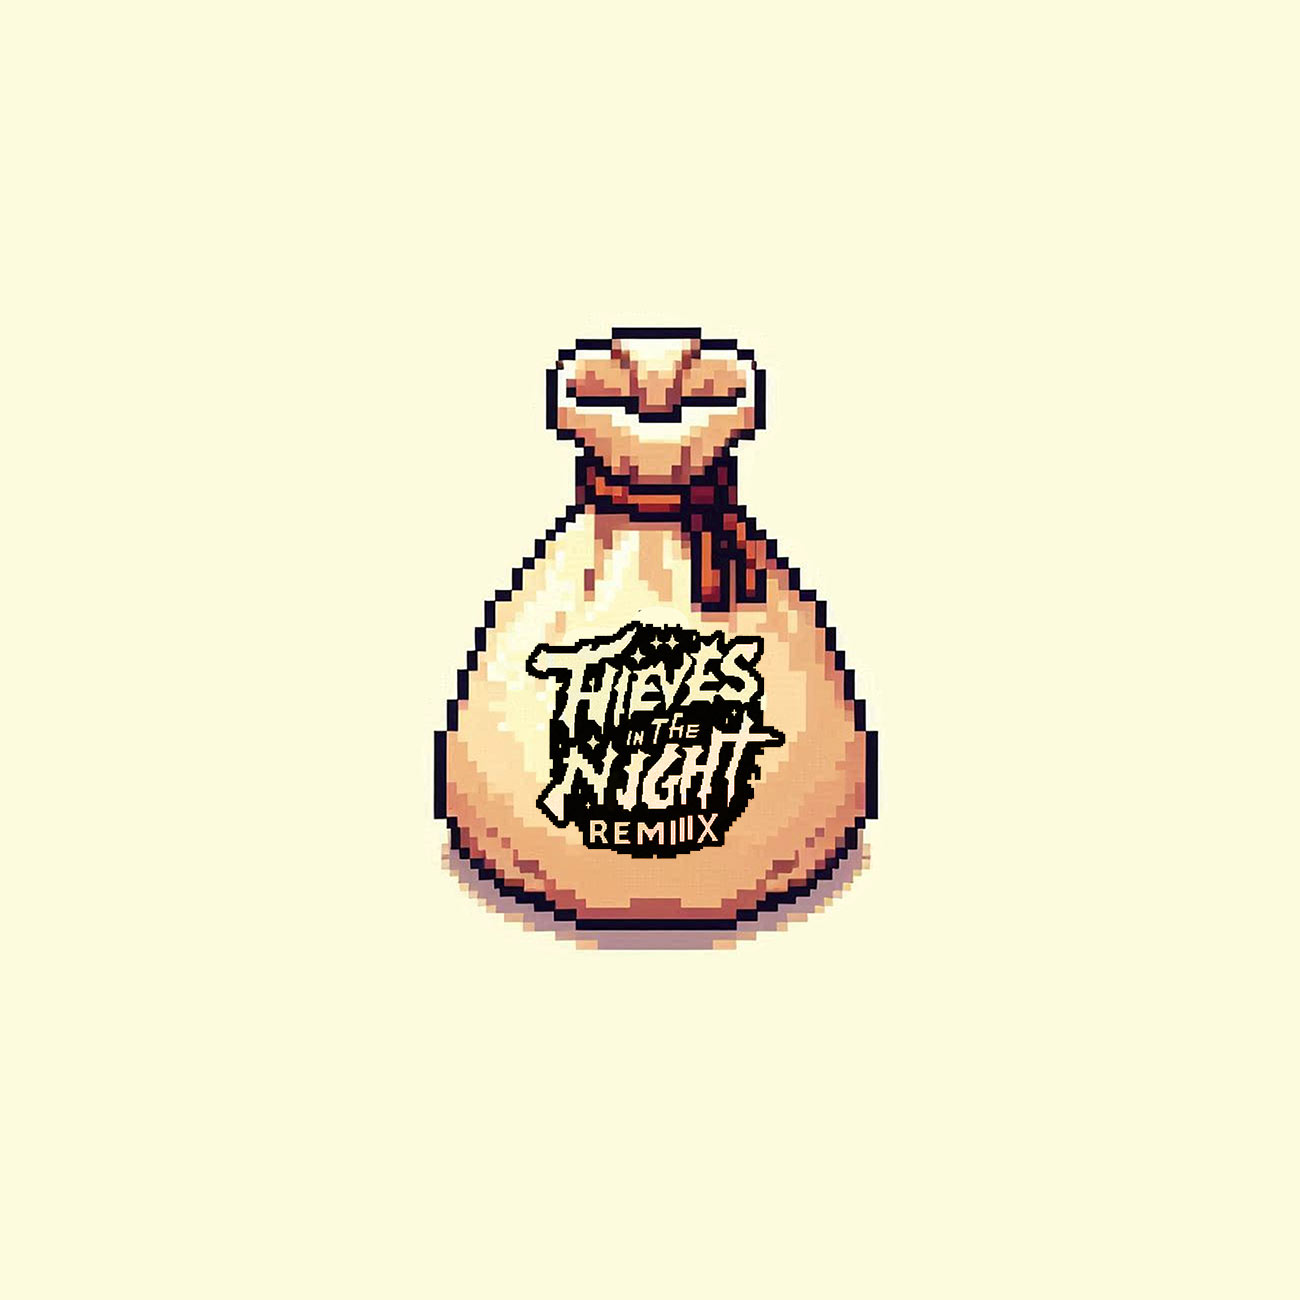 Thieves in the Night remix